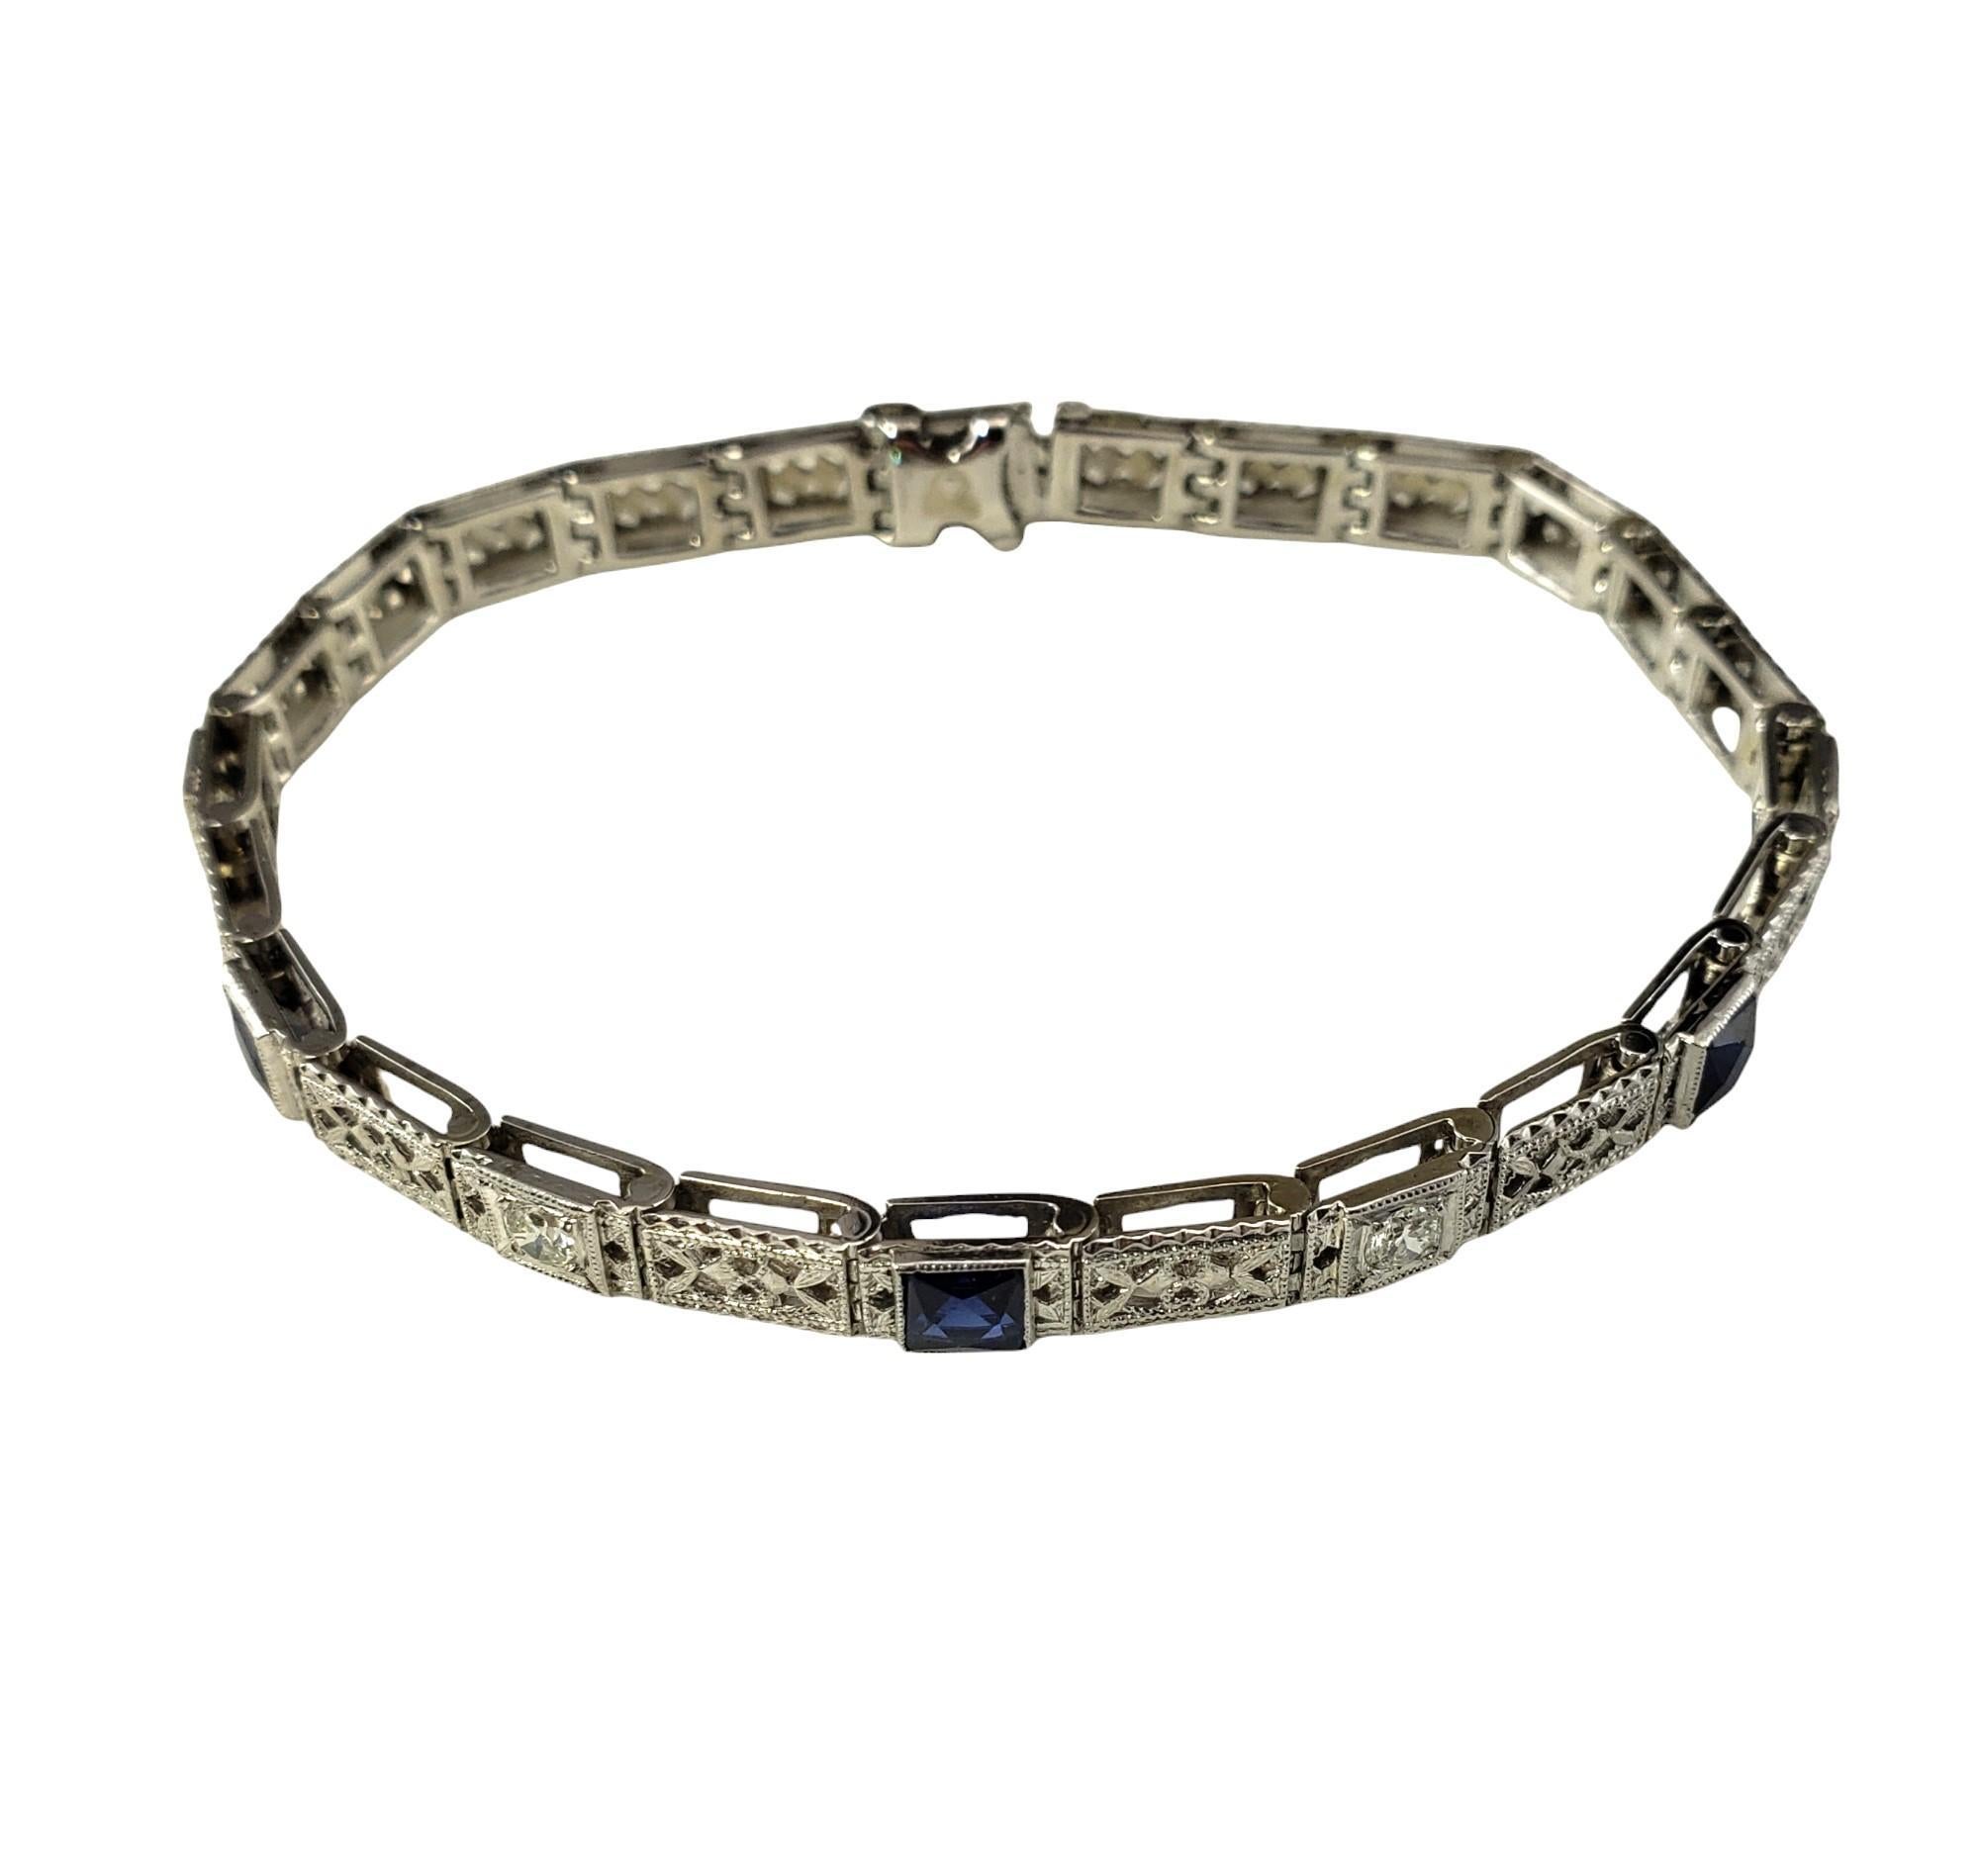 Vintage 14K White Gold Lab Created Sapphire and Diamond Bracelet-

This stunning bracelet features three square lab created sapphires and four round brilliant cut diamonds set in beautifully detailed 14K white gold filigree.  

Width: 4.6